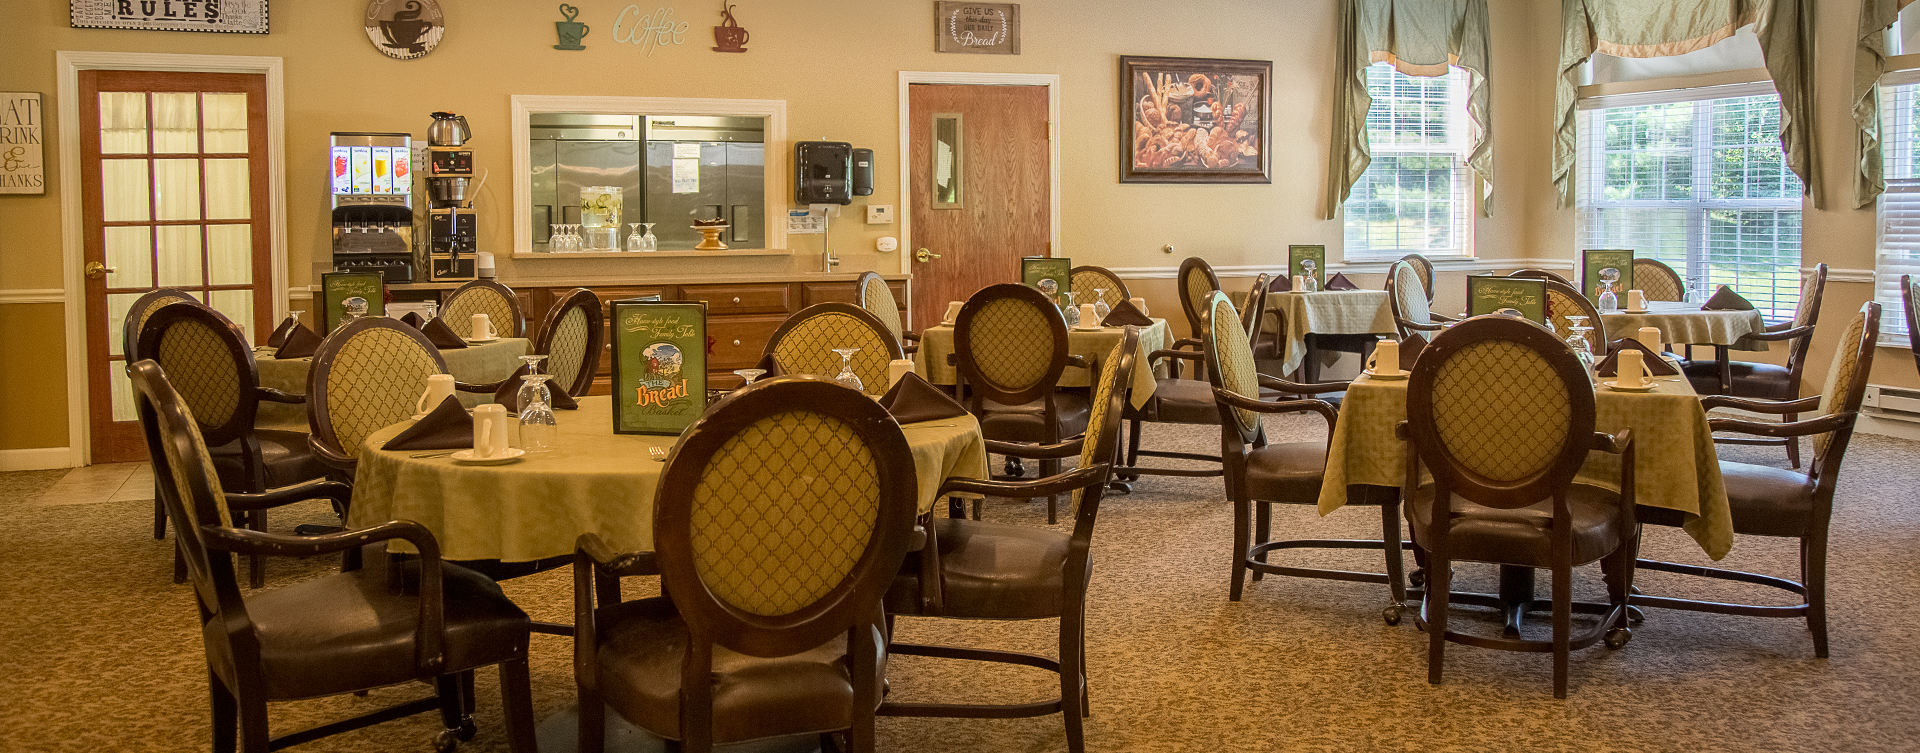 Enjoy homestyle food with made-from-scratch recipes in our dining room at Bickford of Moline